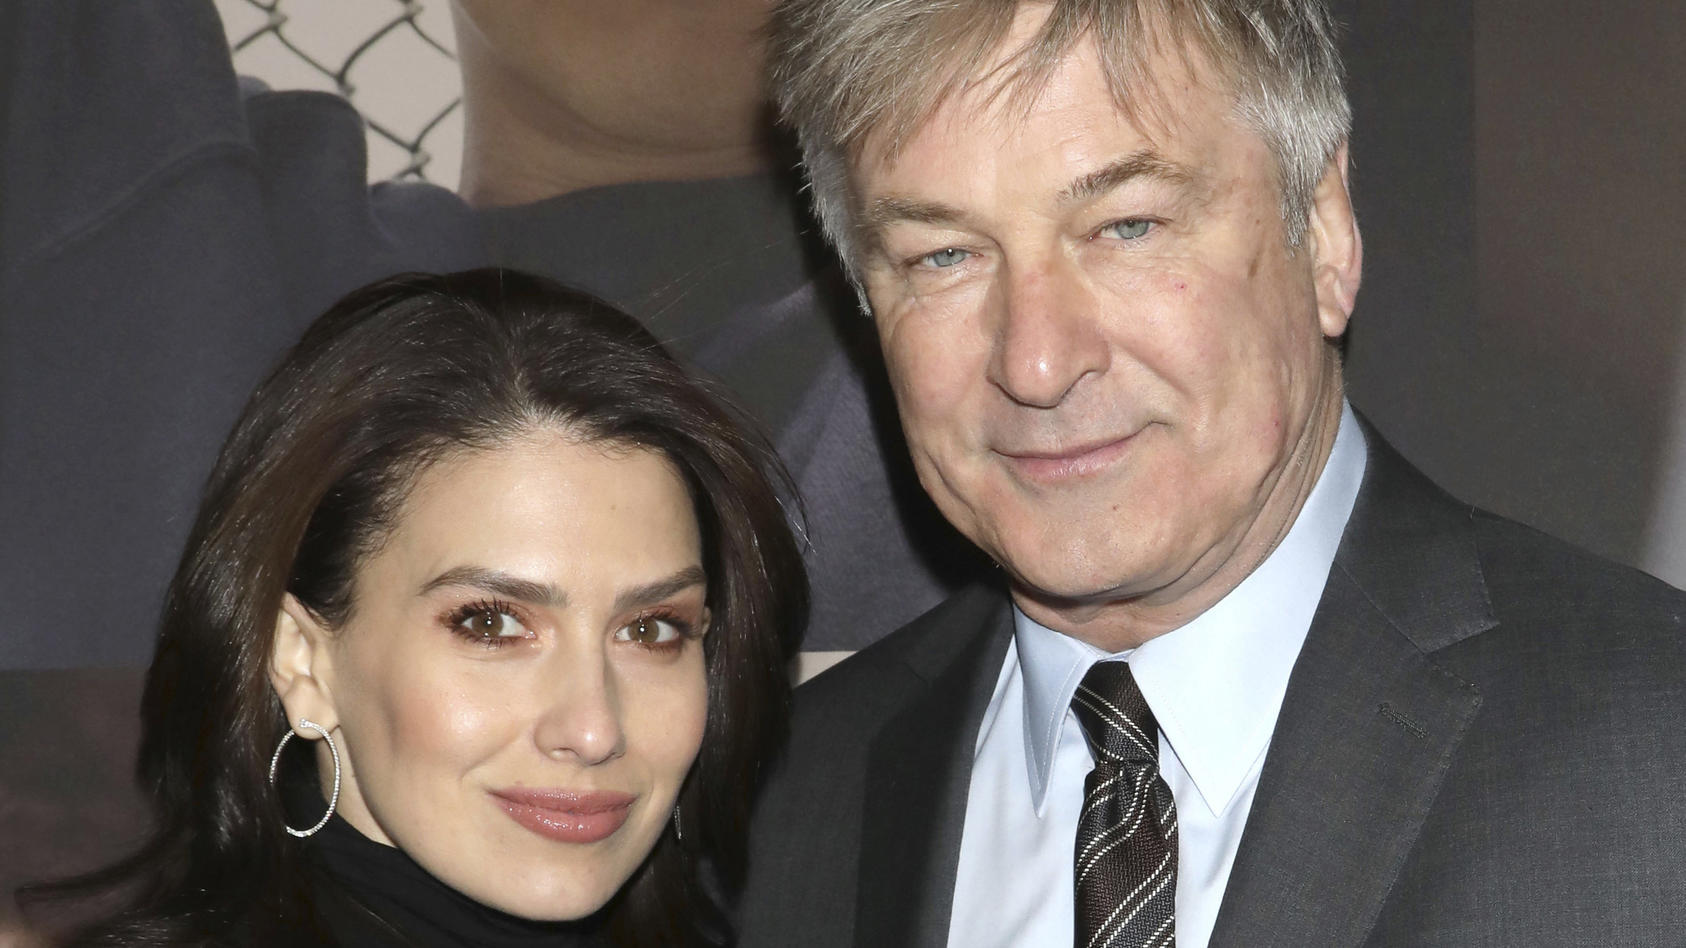 FILE - In this Feb. 20, 2020 file photo, Hilaria Baldwin, left, and Alec Baldwin attend the Broadway opening night of "West Side Story" in New York. Alec Baldwin returns as host of the game show "Match Game," Sunday on ABC. (Photo by Greg Allen/Invis